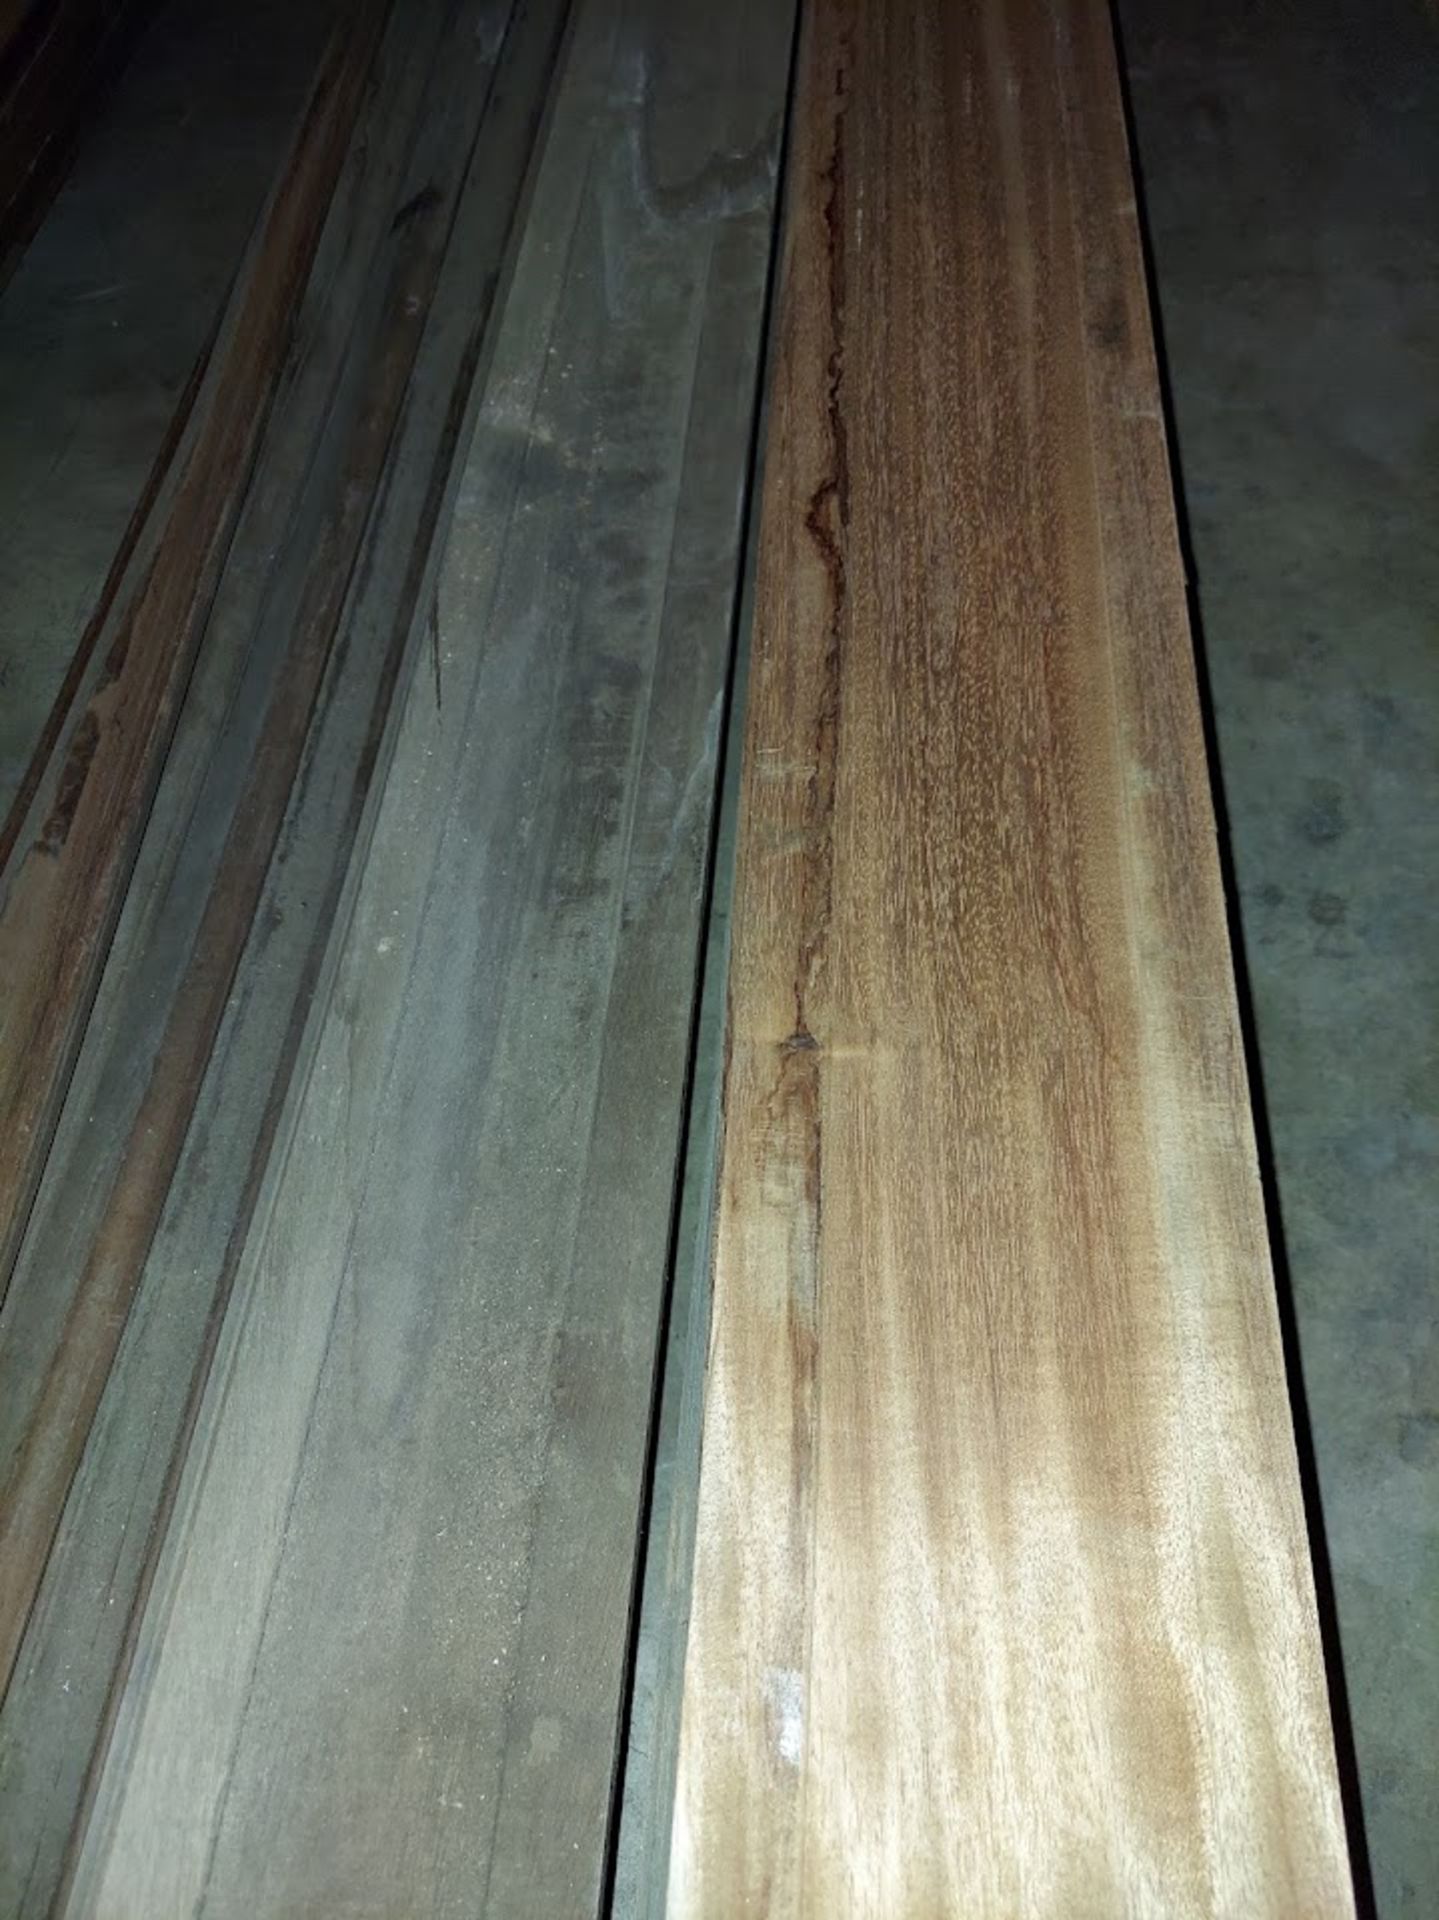 Lot of African Mahogany Molding, Up to 17' Long - Image 2 of 3